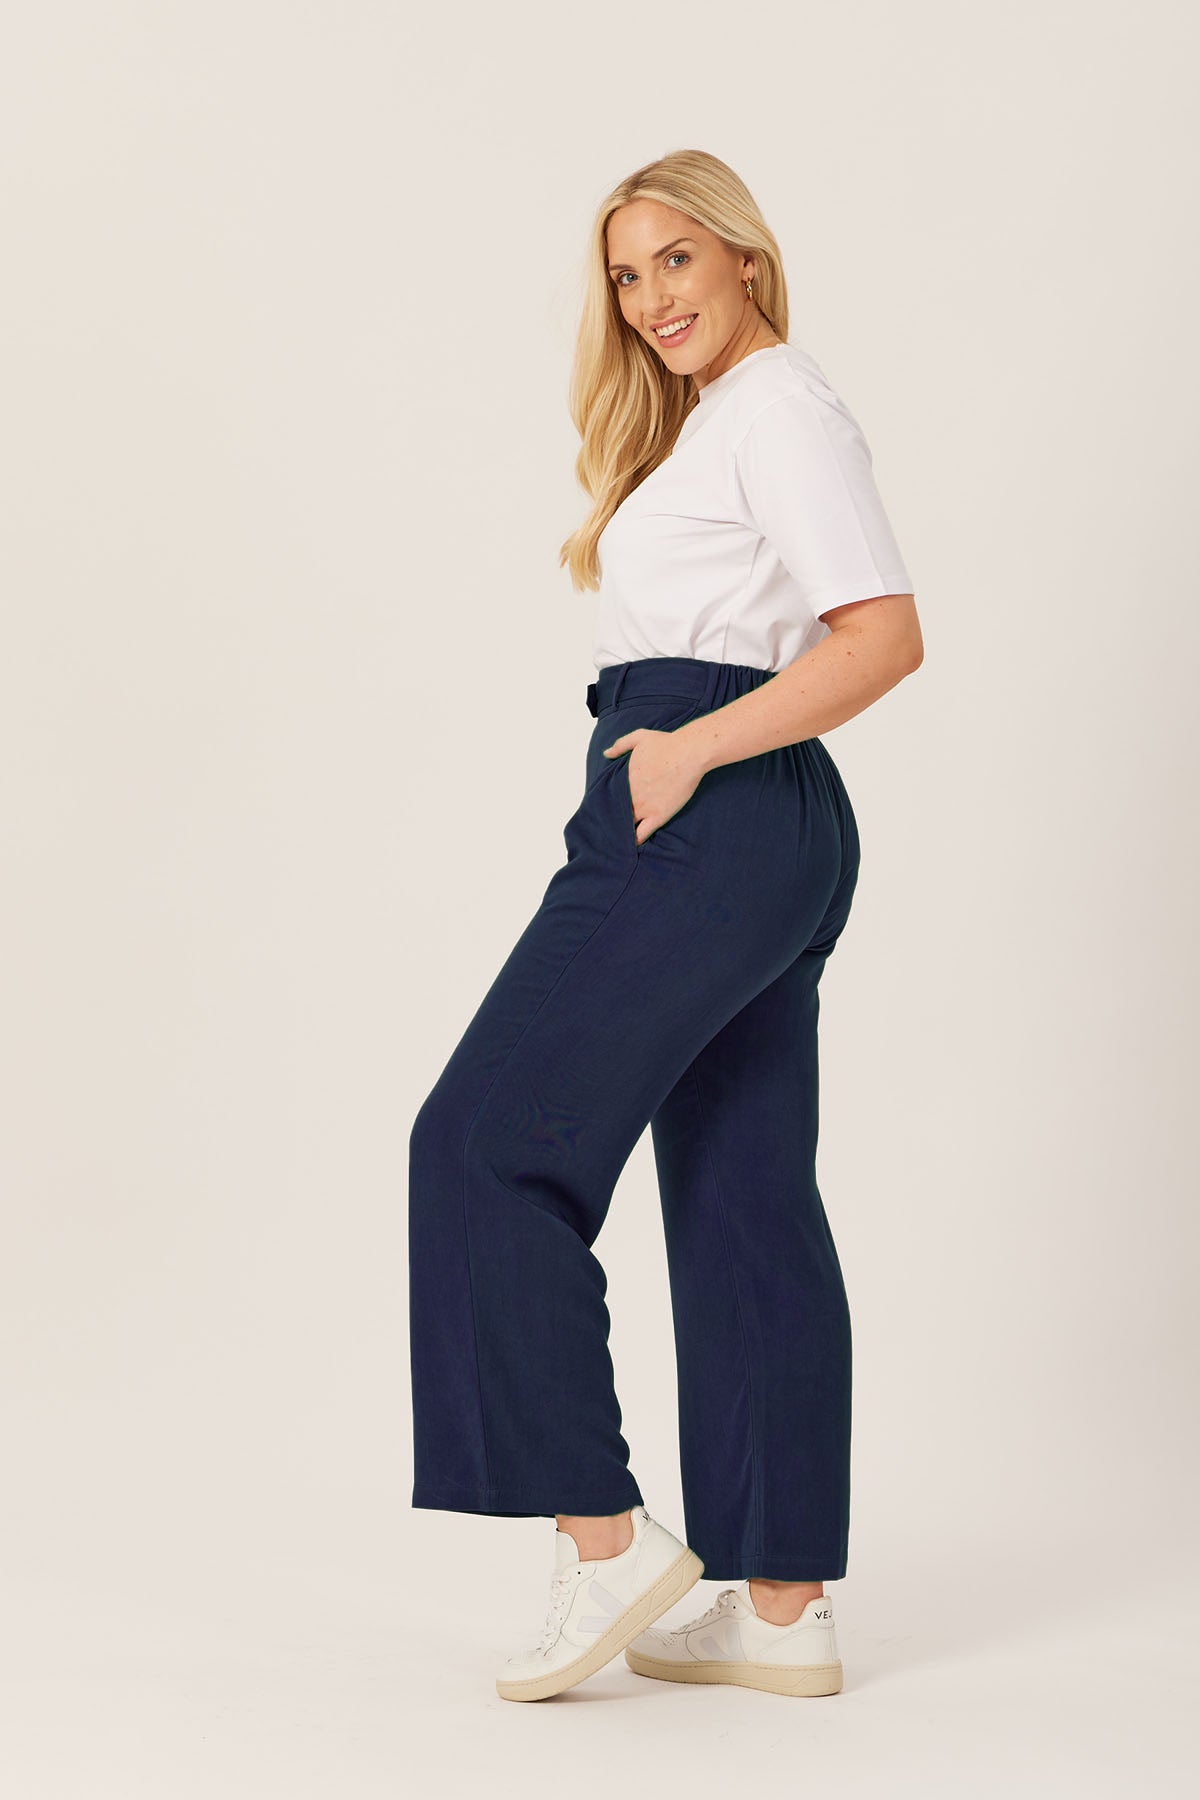 The Best Non-Skinny Jeans To Buy In 2023